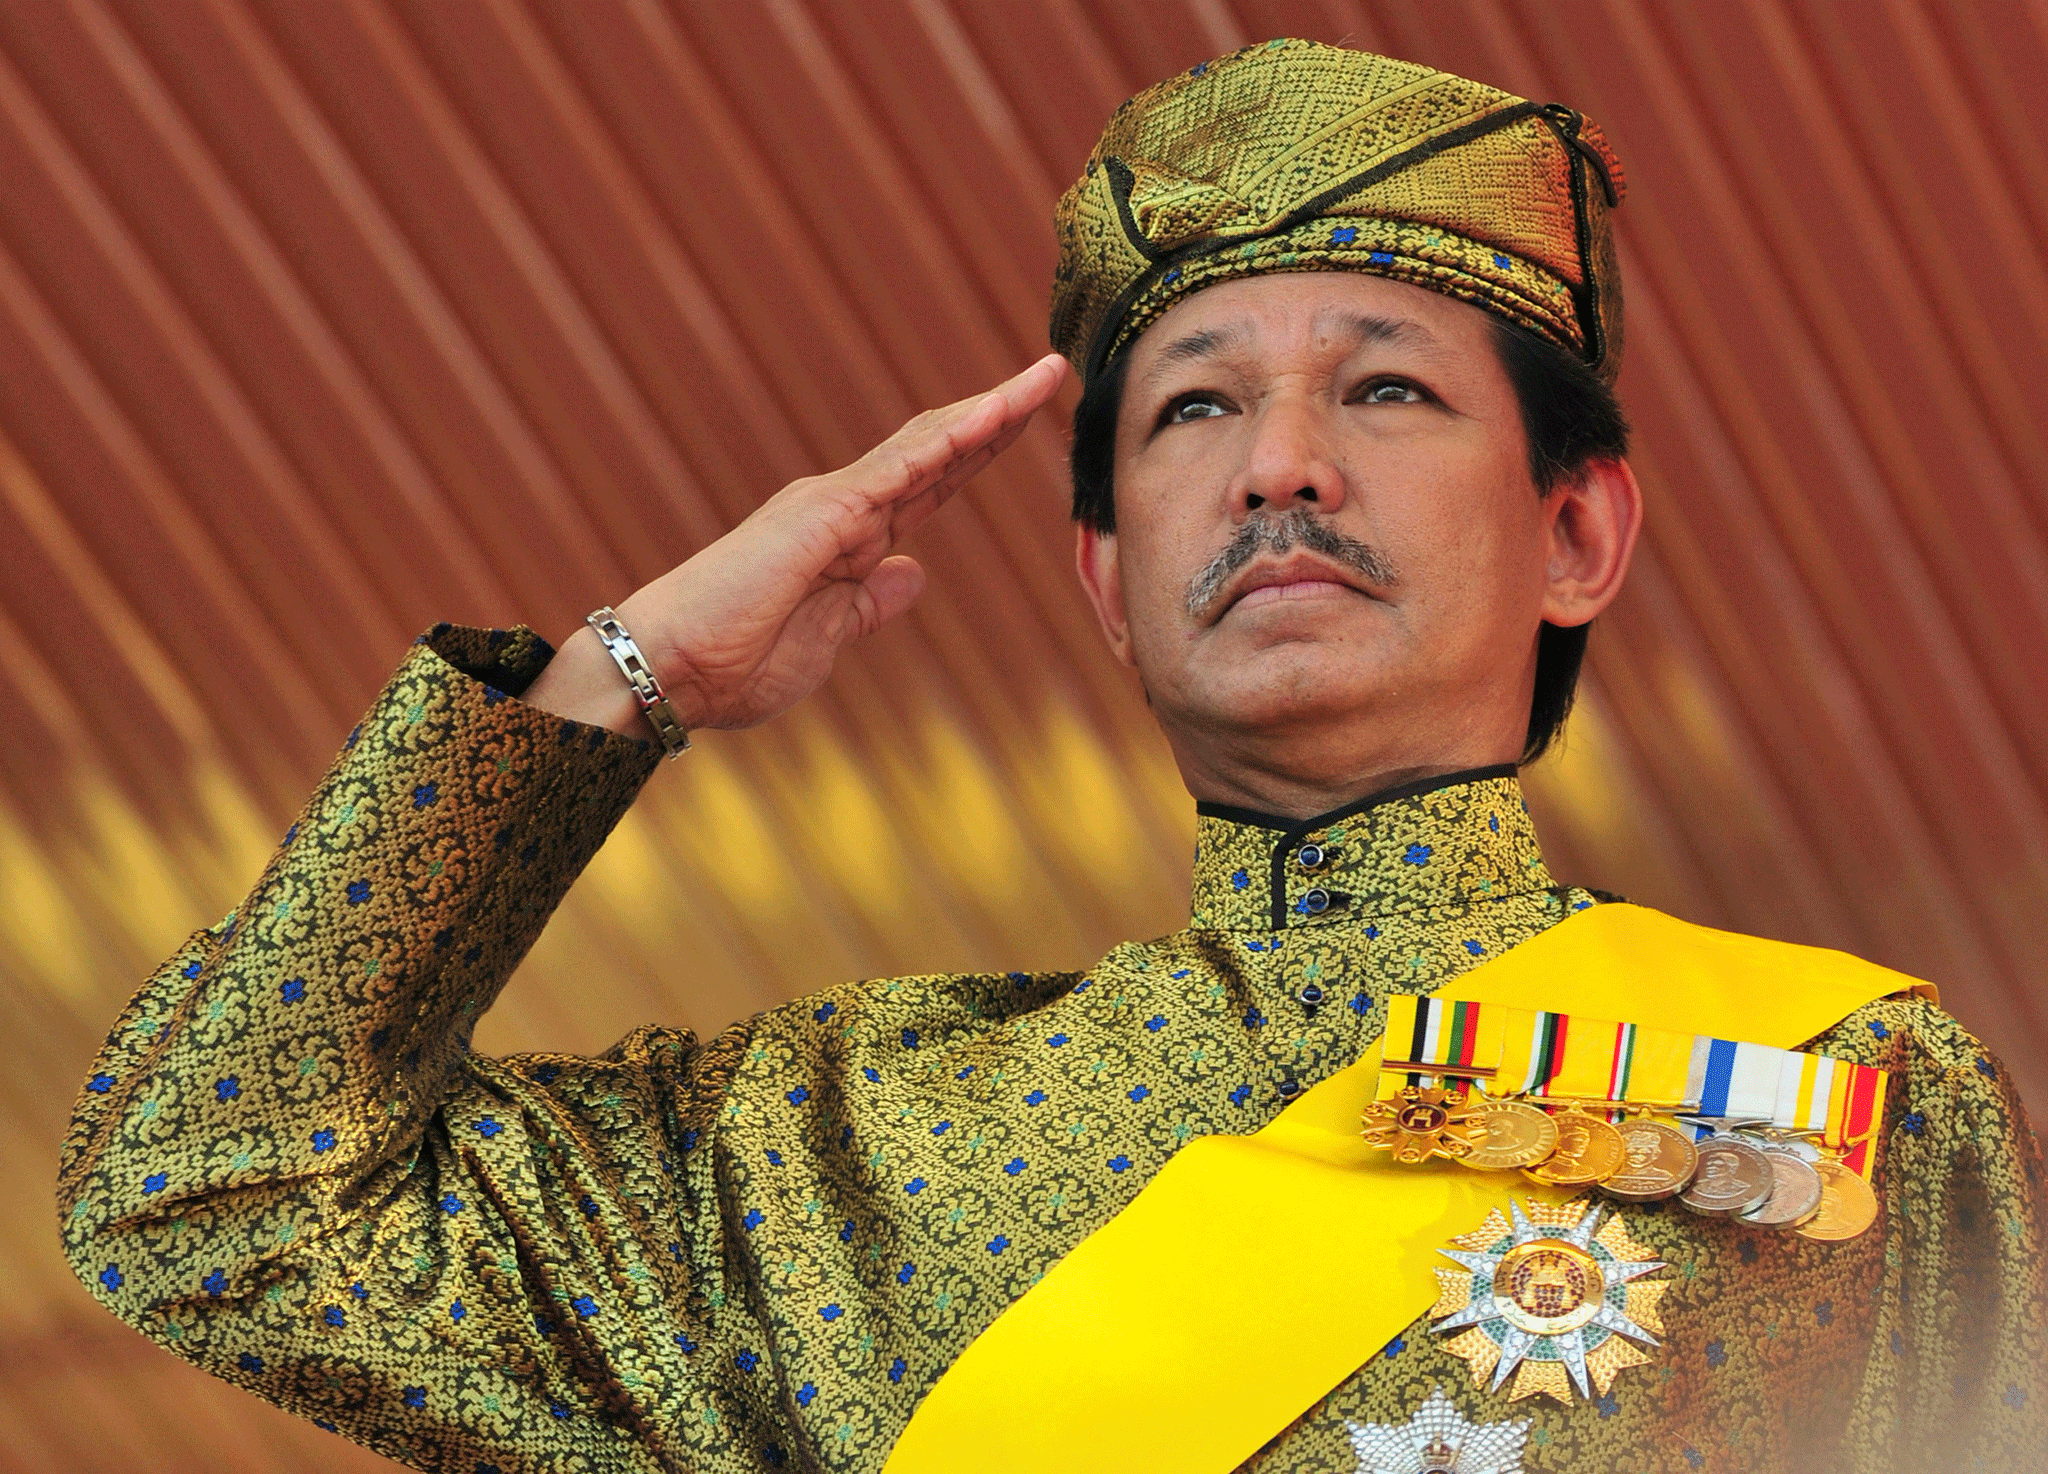 Prince Jefri Bolkiah of Brunei lived a lavish lifestyle and is alleged to have embezzled $15bn from his country’s sovereign wealth fund